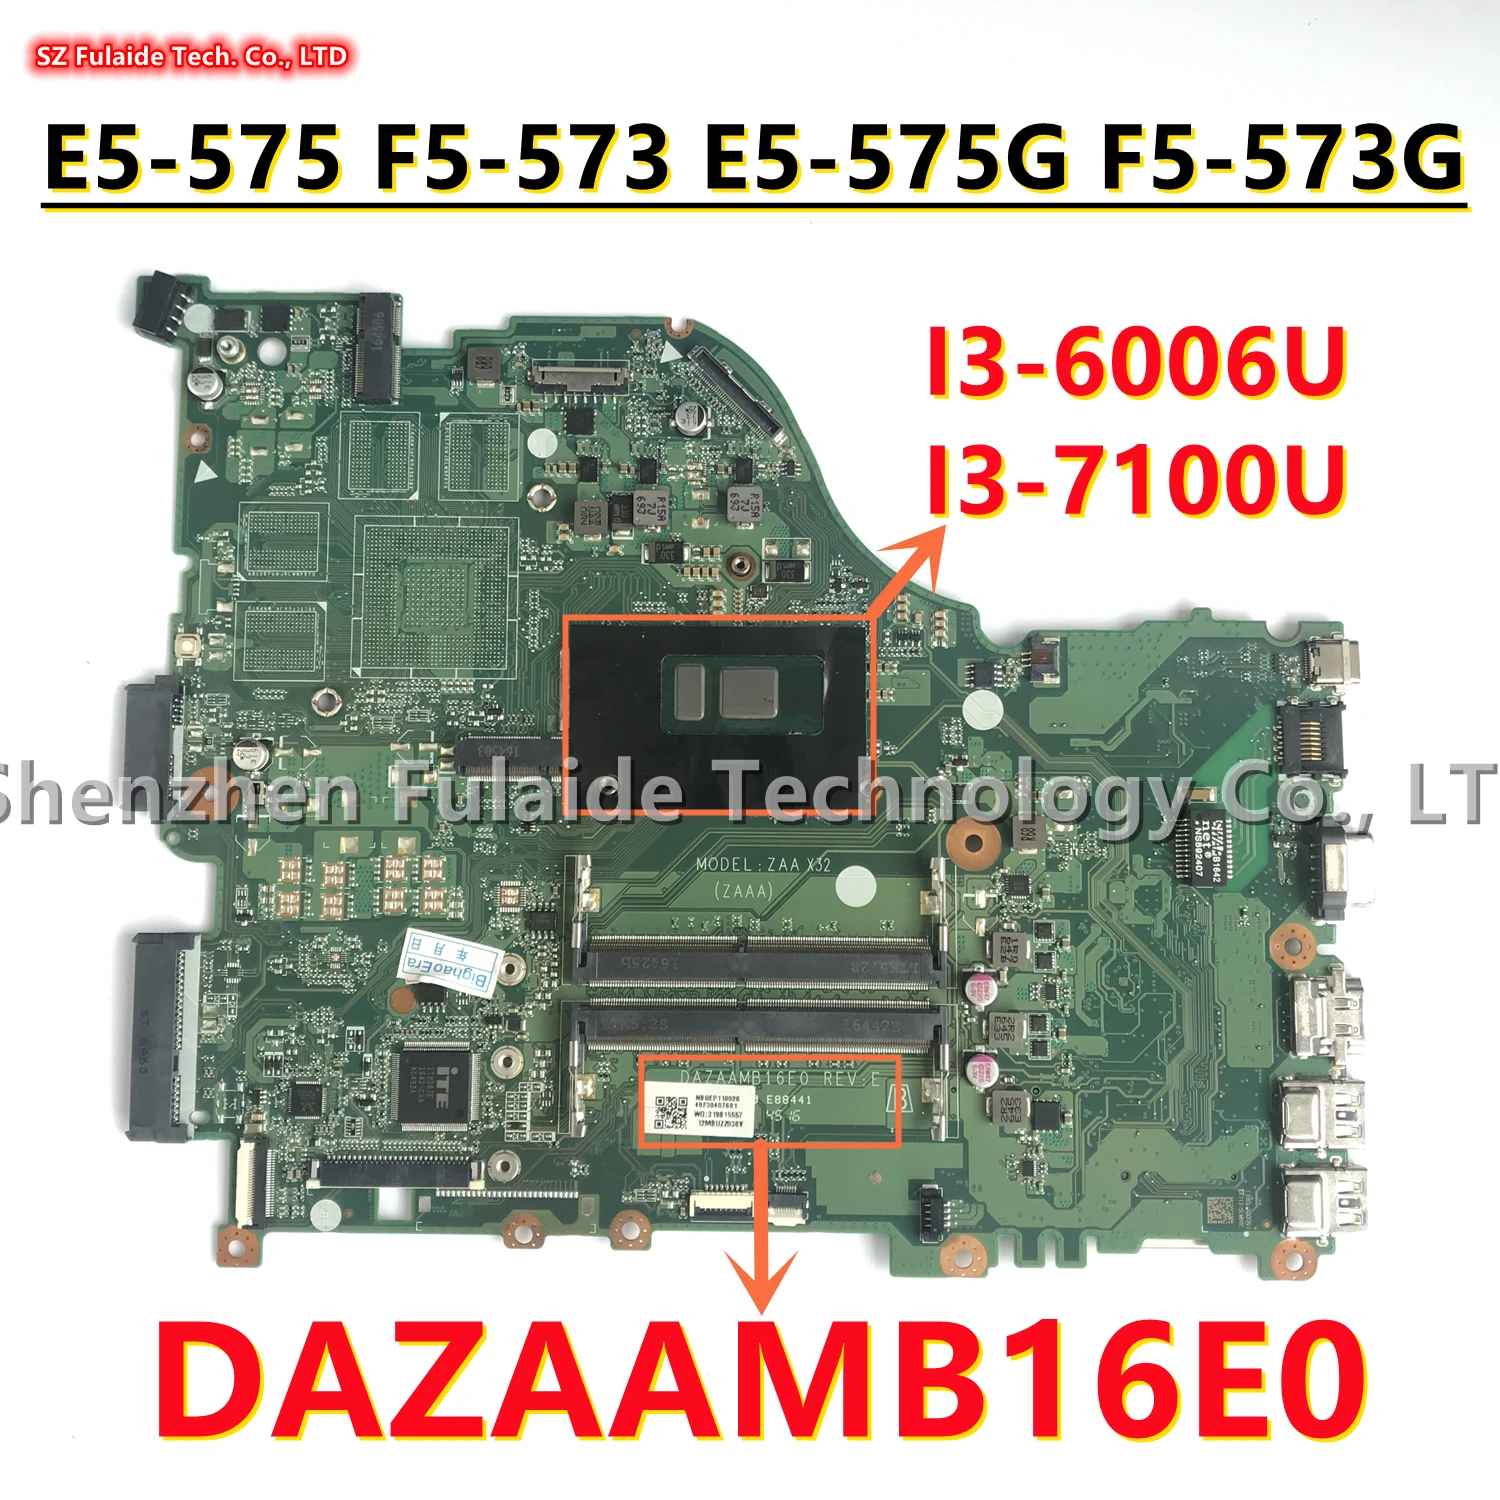 

DAZAAMB16E0 ZAA X32 For Acer Aspire E5-575 F5-573 E5-575G F5-573G Laptop Motherboard With I3-6006 I3-7100 CPU NBVDA110057